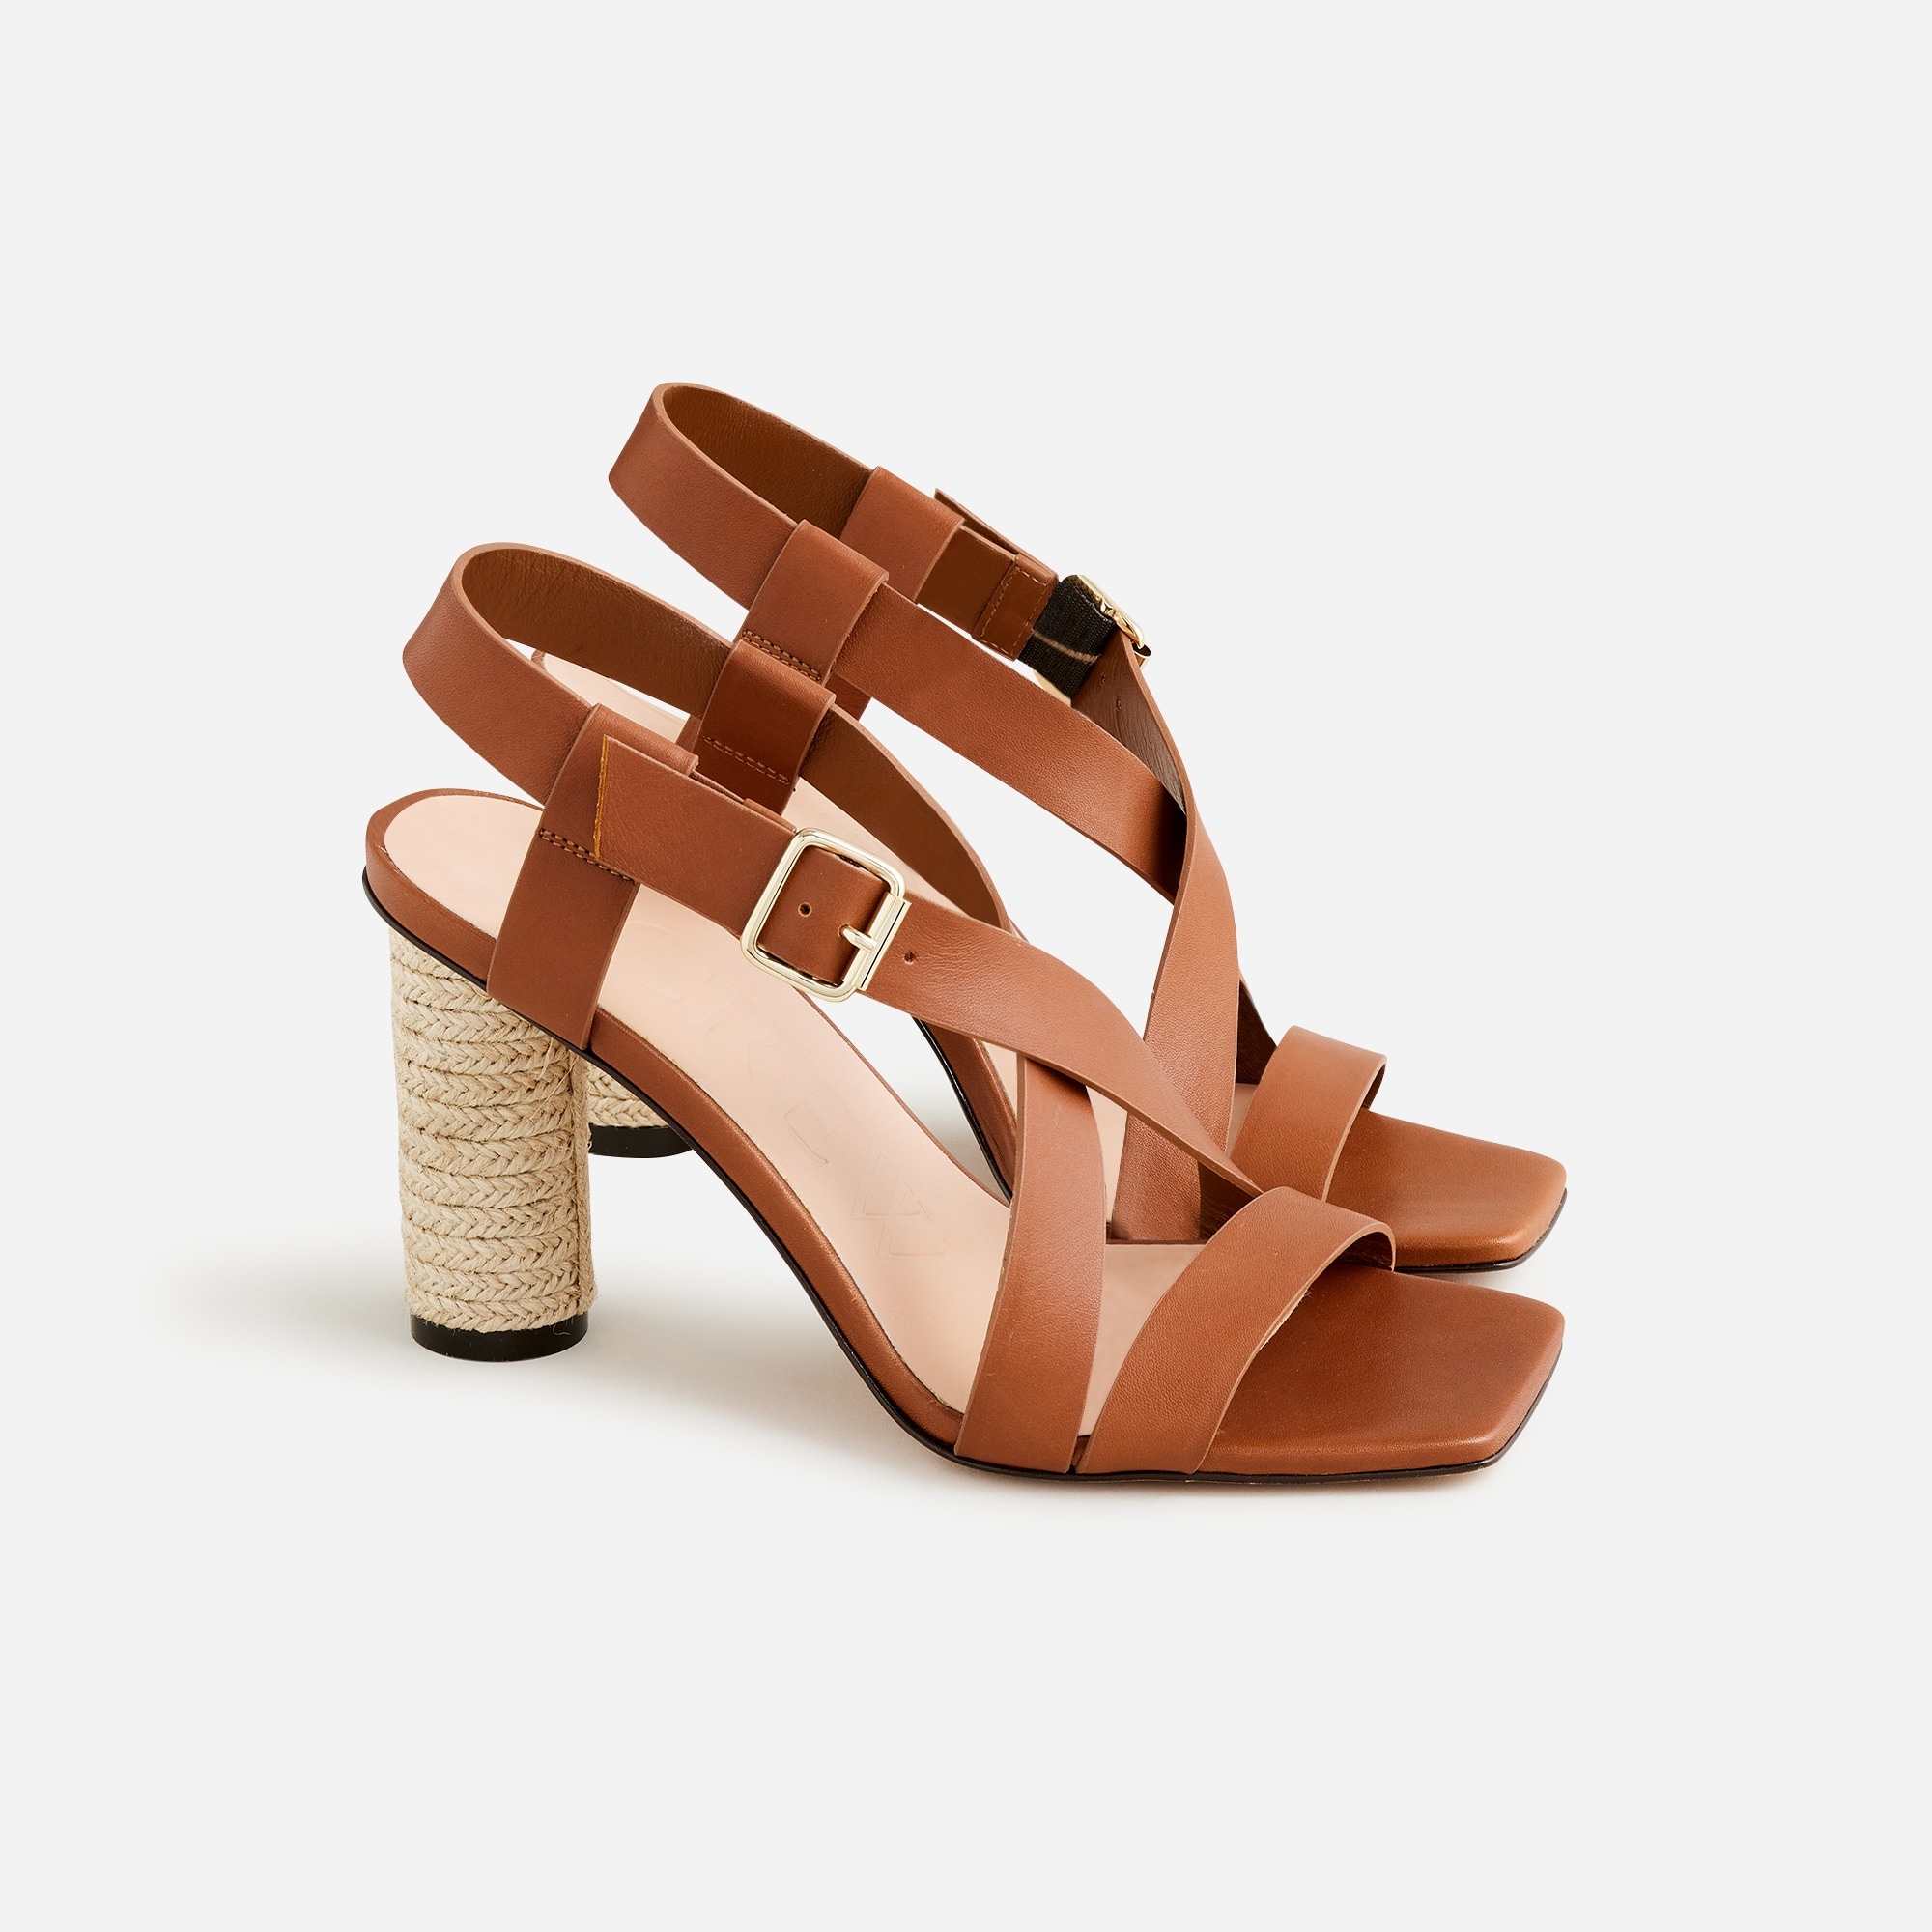 Jcrew Rounded rope-heel sandals in leather